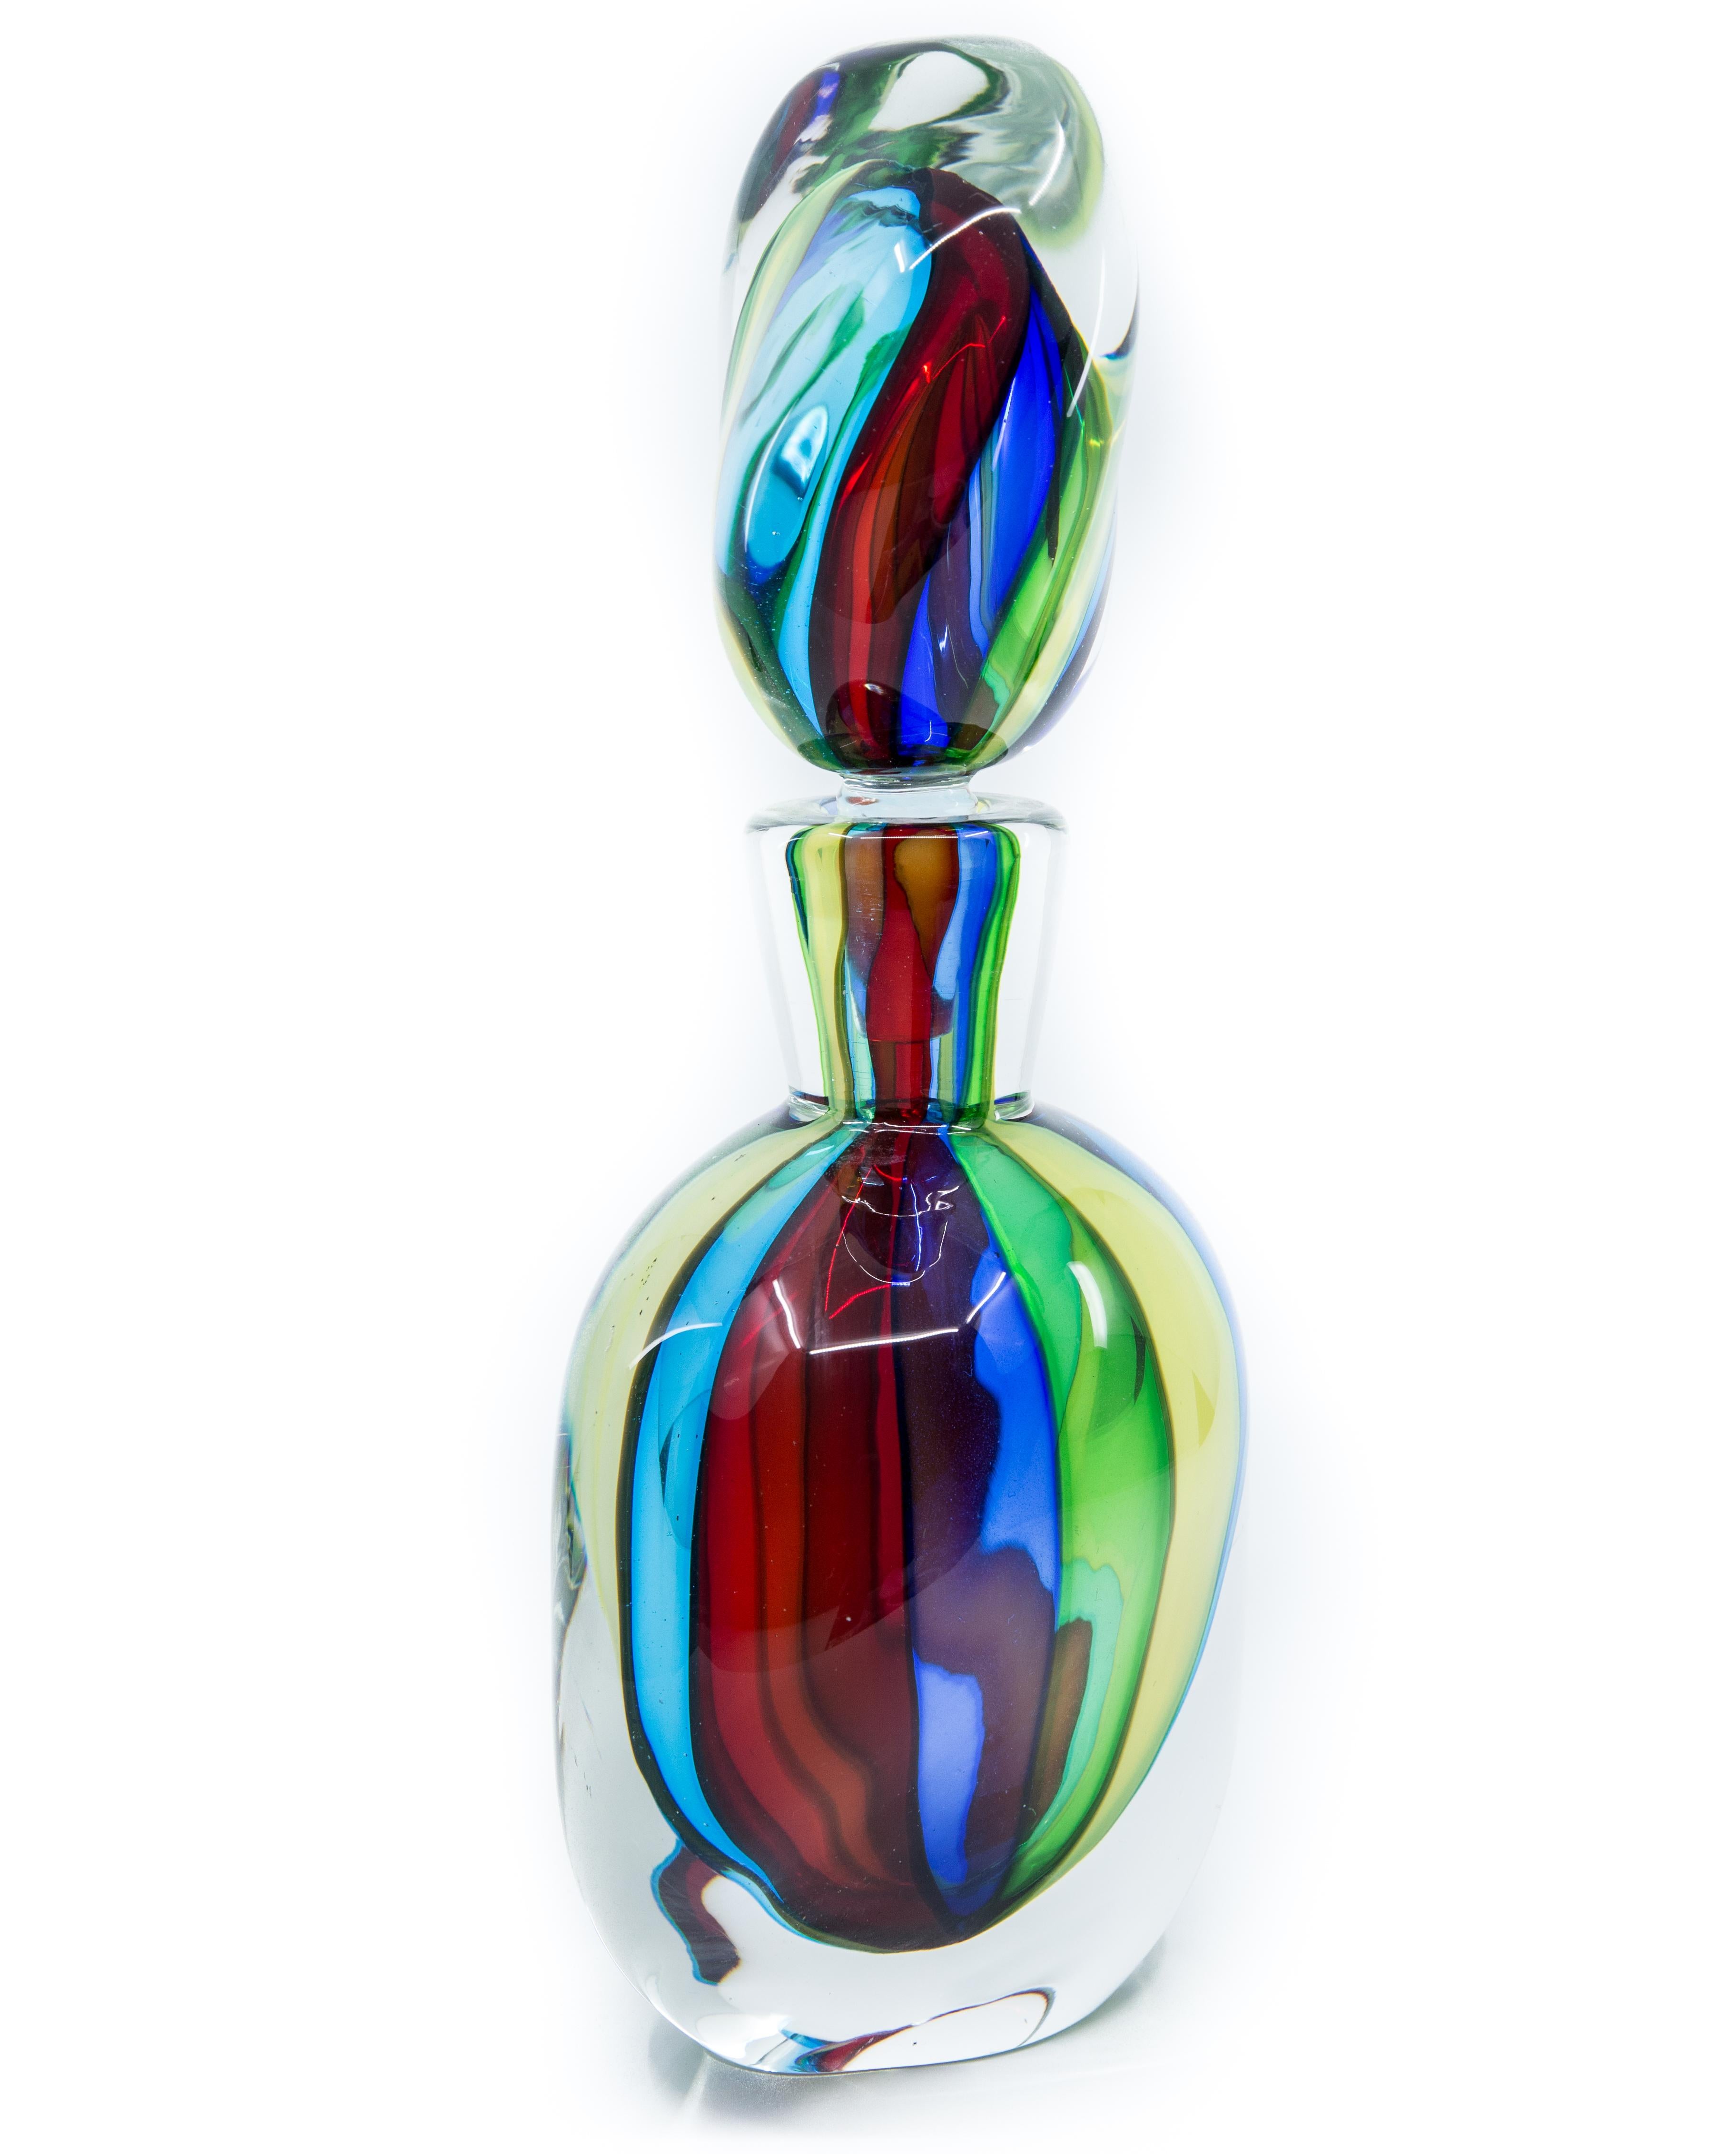 Offered is an excellent hand blown Murano glass Sommerso decanter in good condition complete with original stopper that stands tall at approximately 14” in height. The decanter dates from the 1980s.